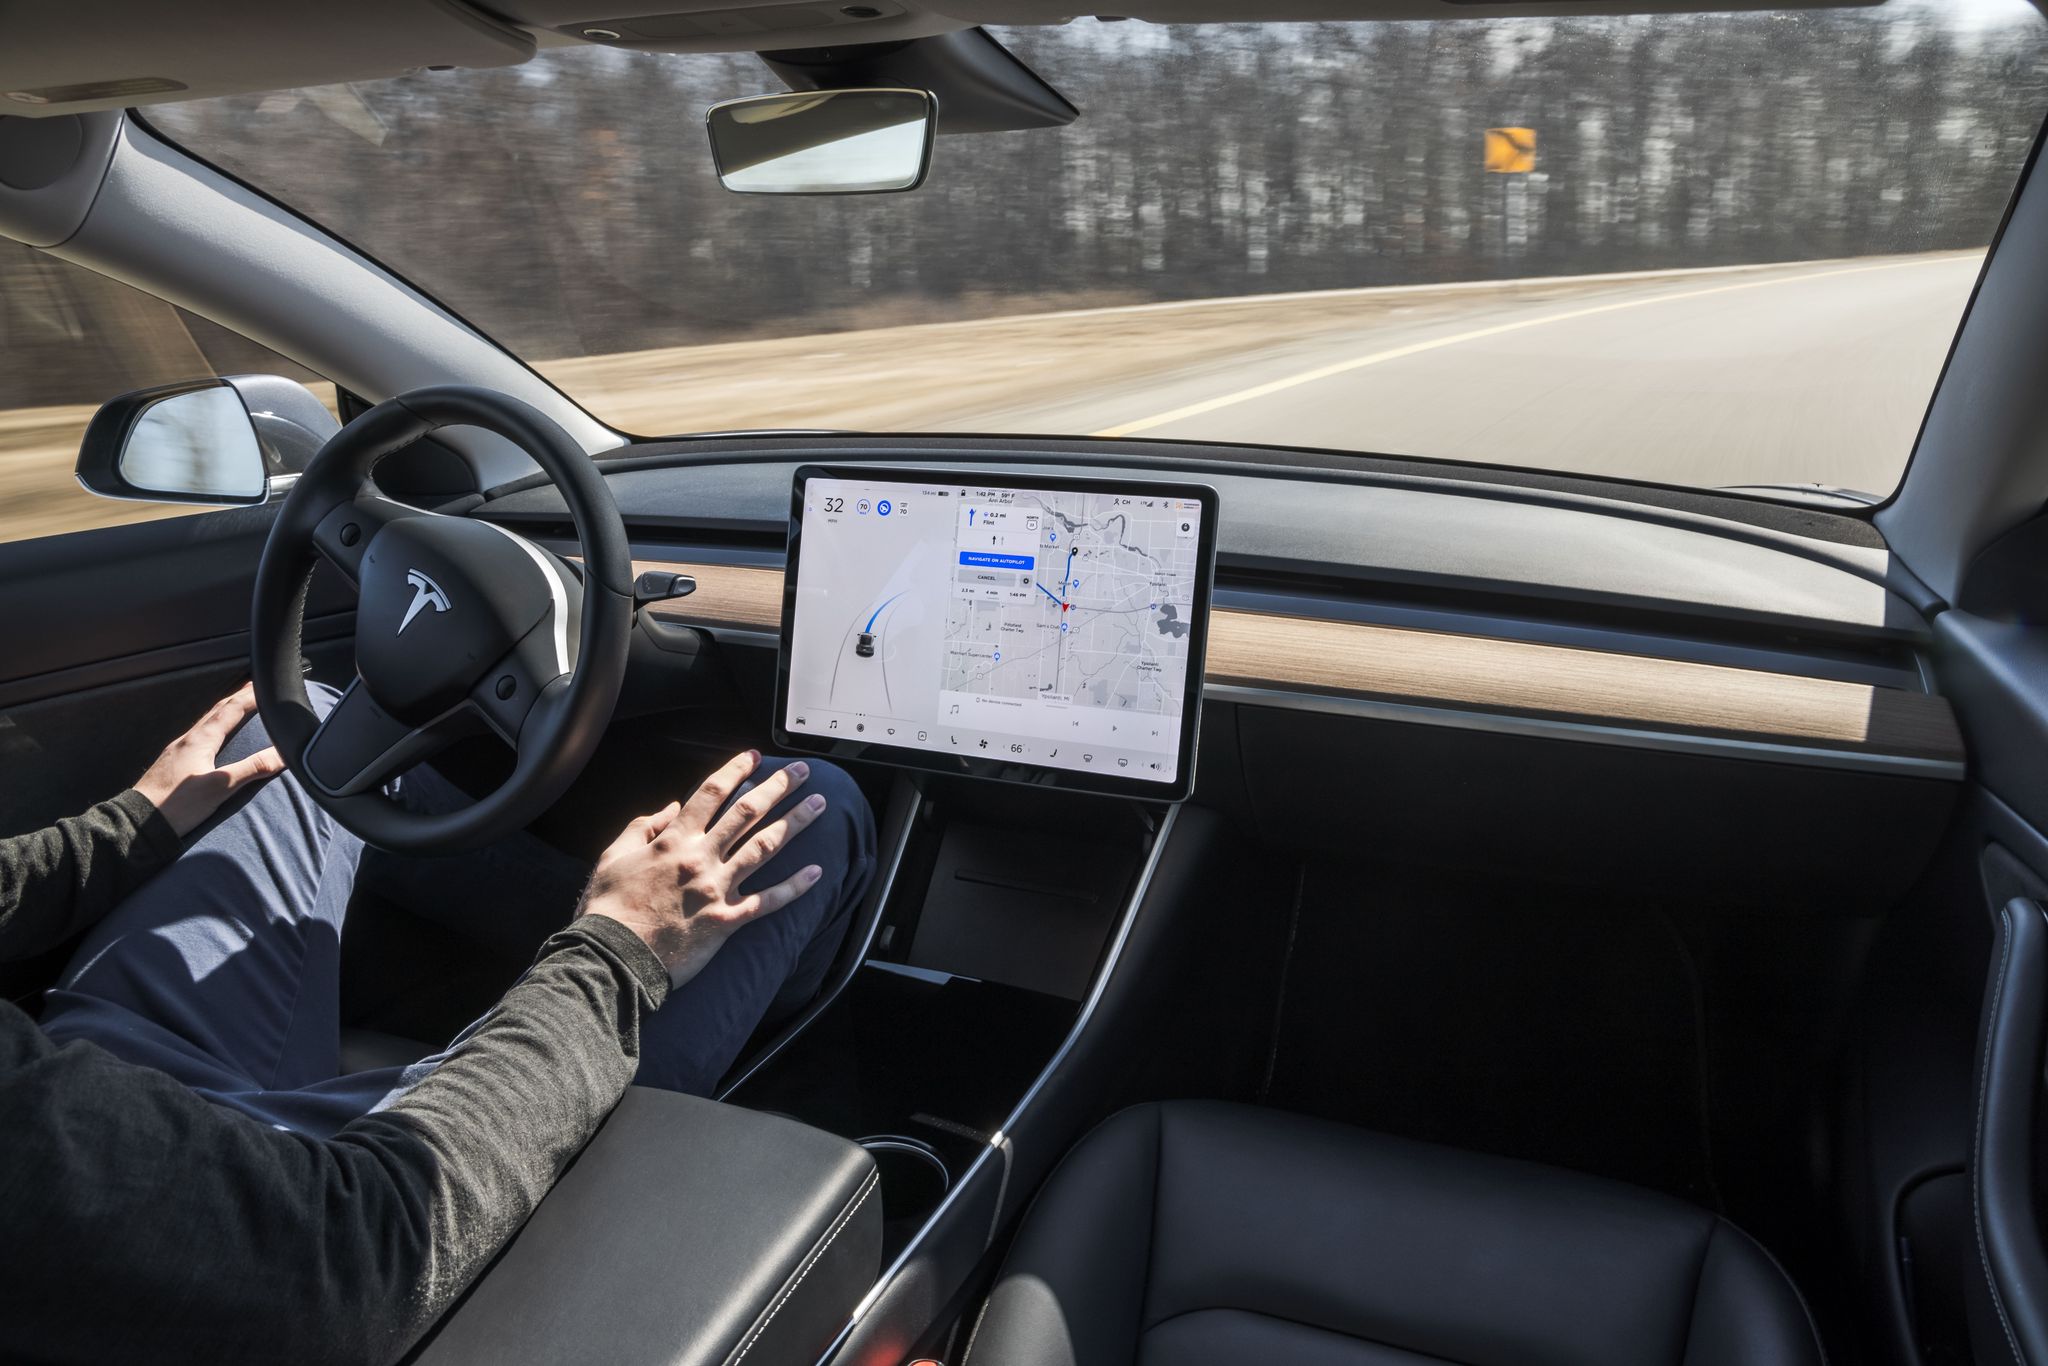 What Does Tesla's Automated Truck Mean for Truckers?